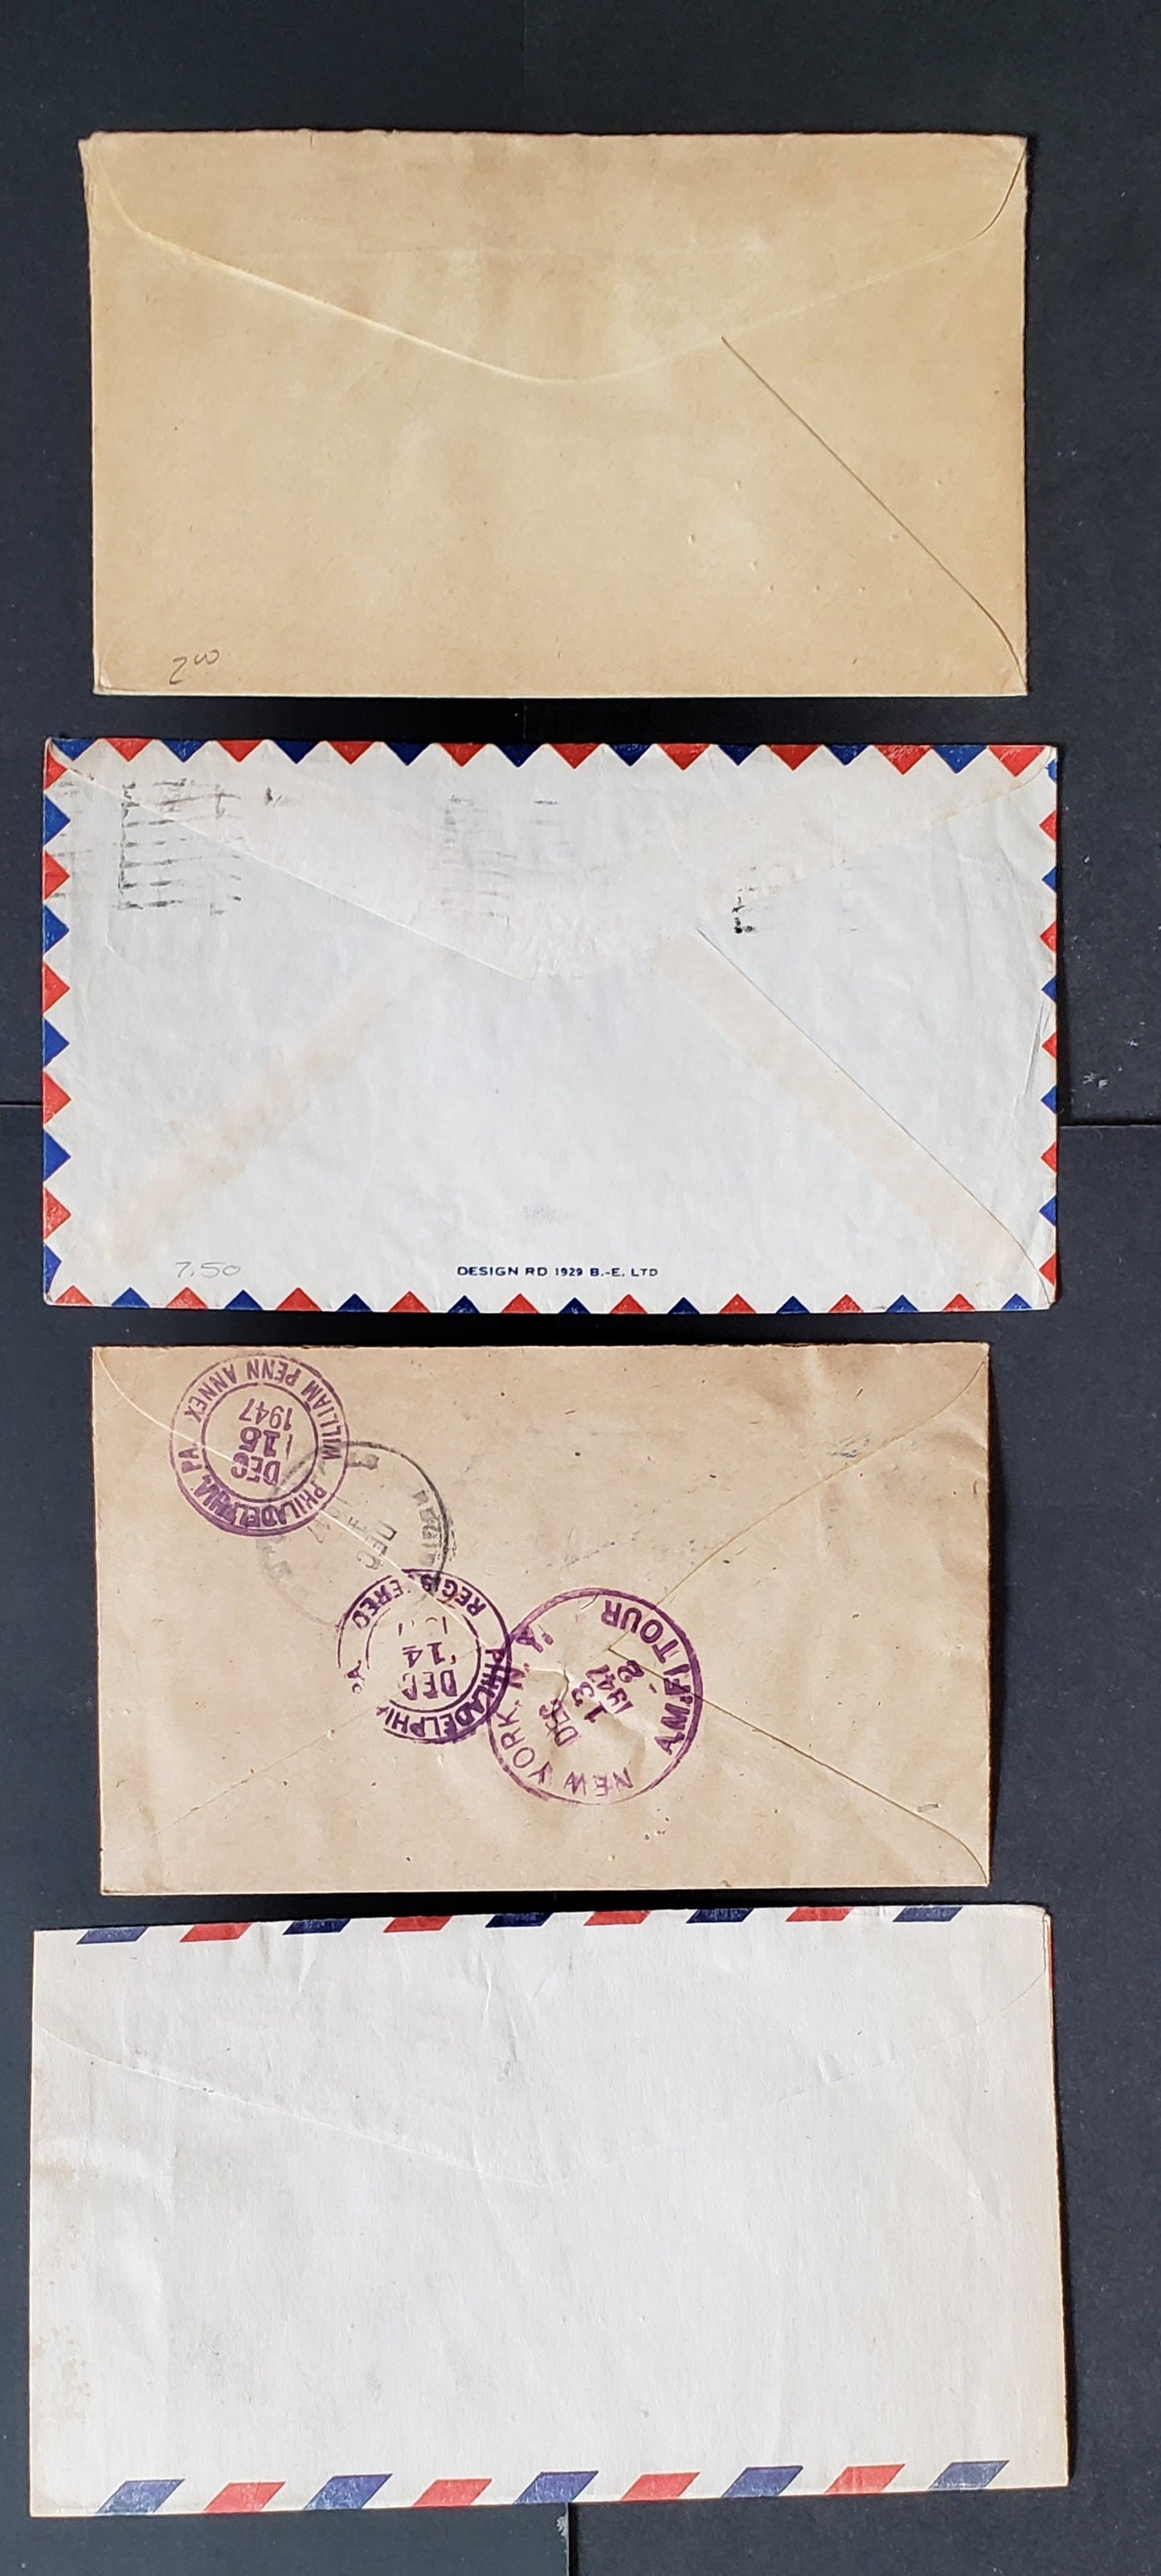 Lot 92 Newfoundland #255, 260, 262 3c/15c Rose Carmine/Pale Rose Violet Queen Elizabeth - Harp Seal Pup 1941-1944 Second Resource Issue, 4 Airmail & Registered Covers Franked With Single, Pair & Blocks, Cat. Value $20